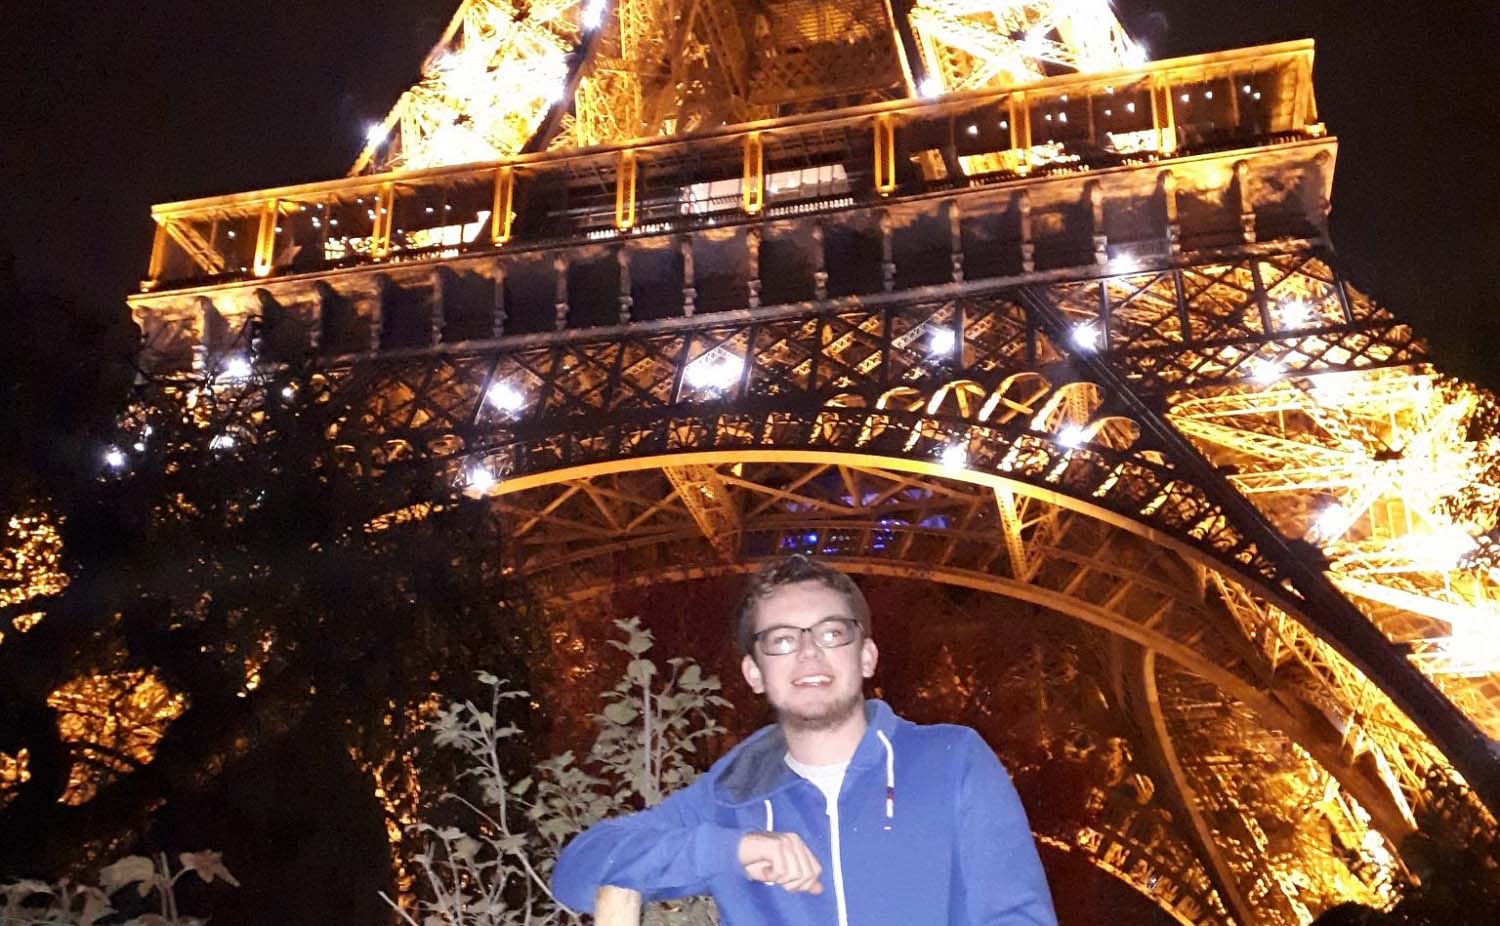 Joe in front of the Eiffel Tower at night when it is lit up. 